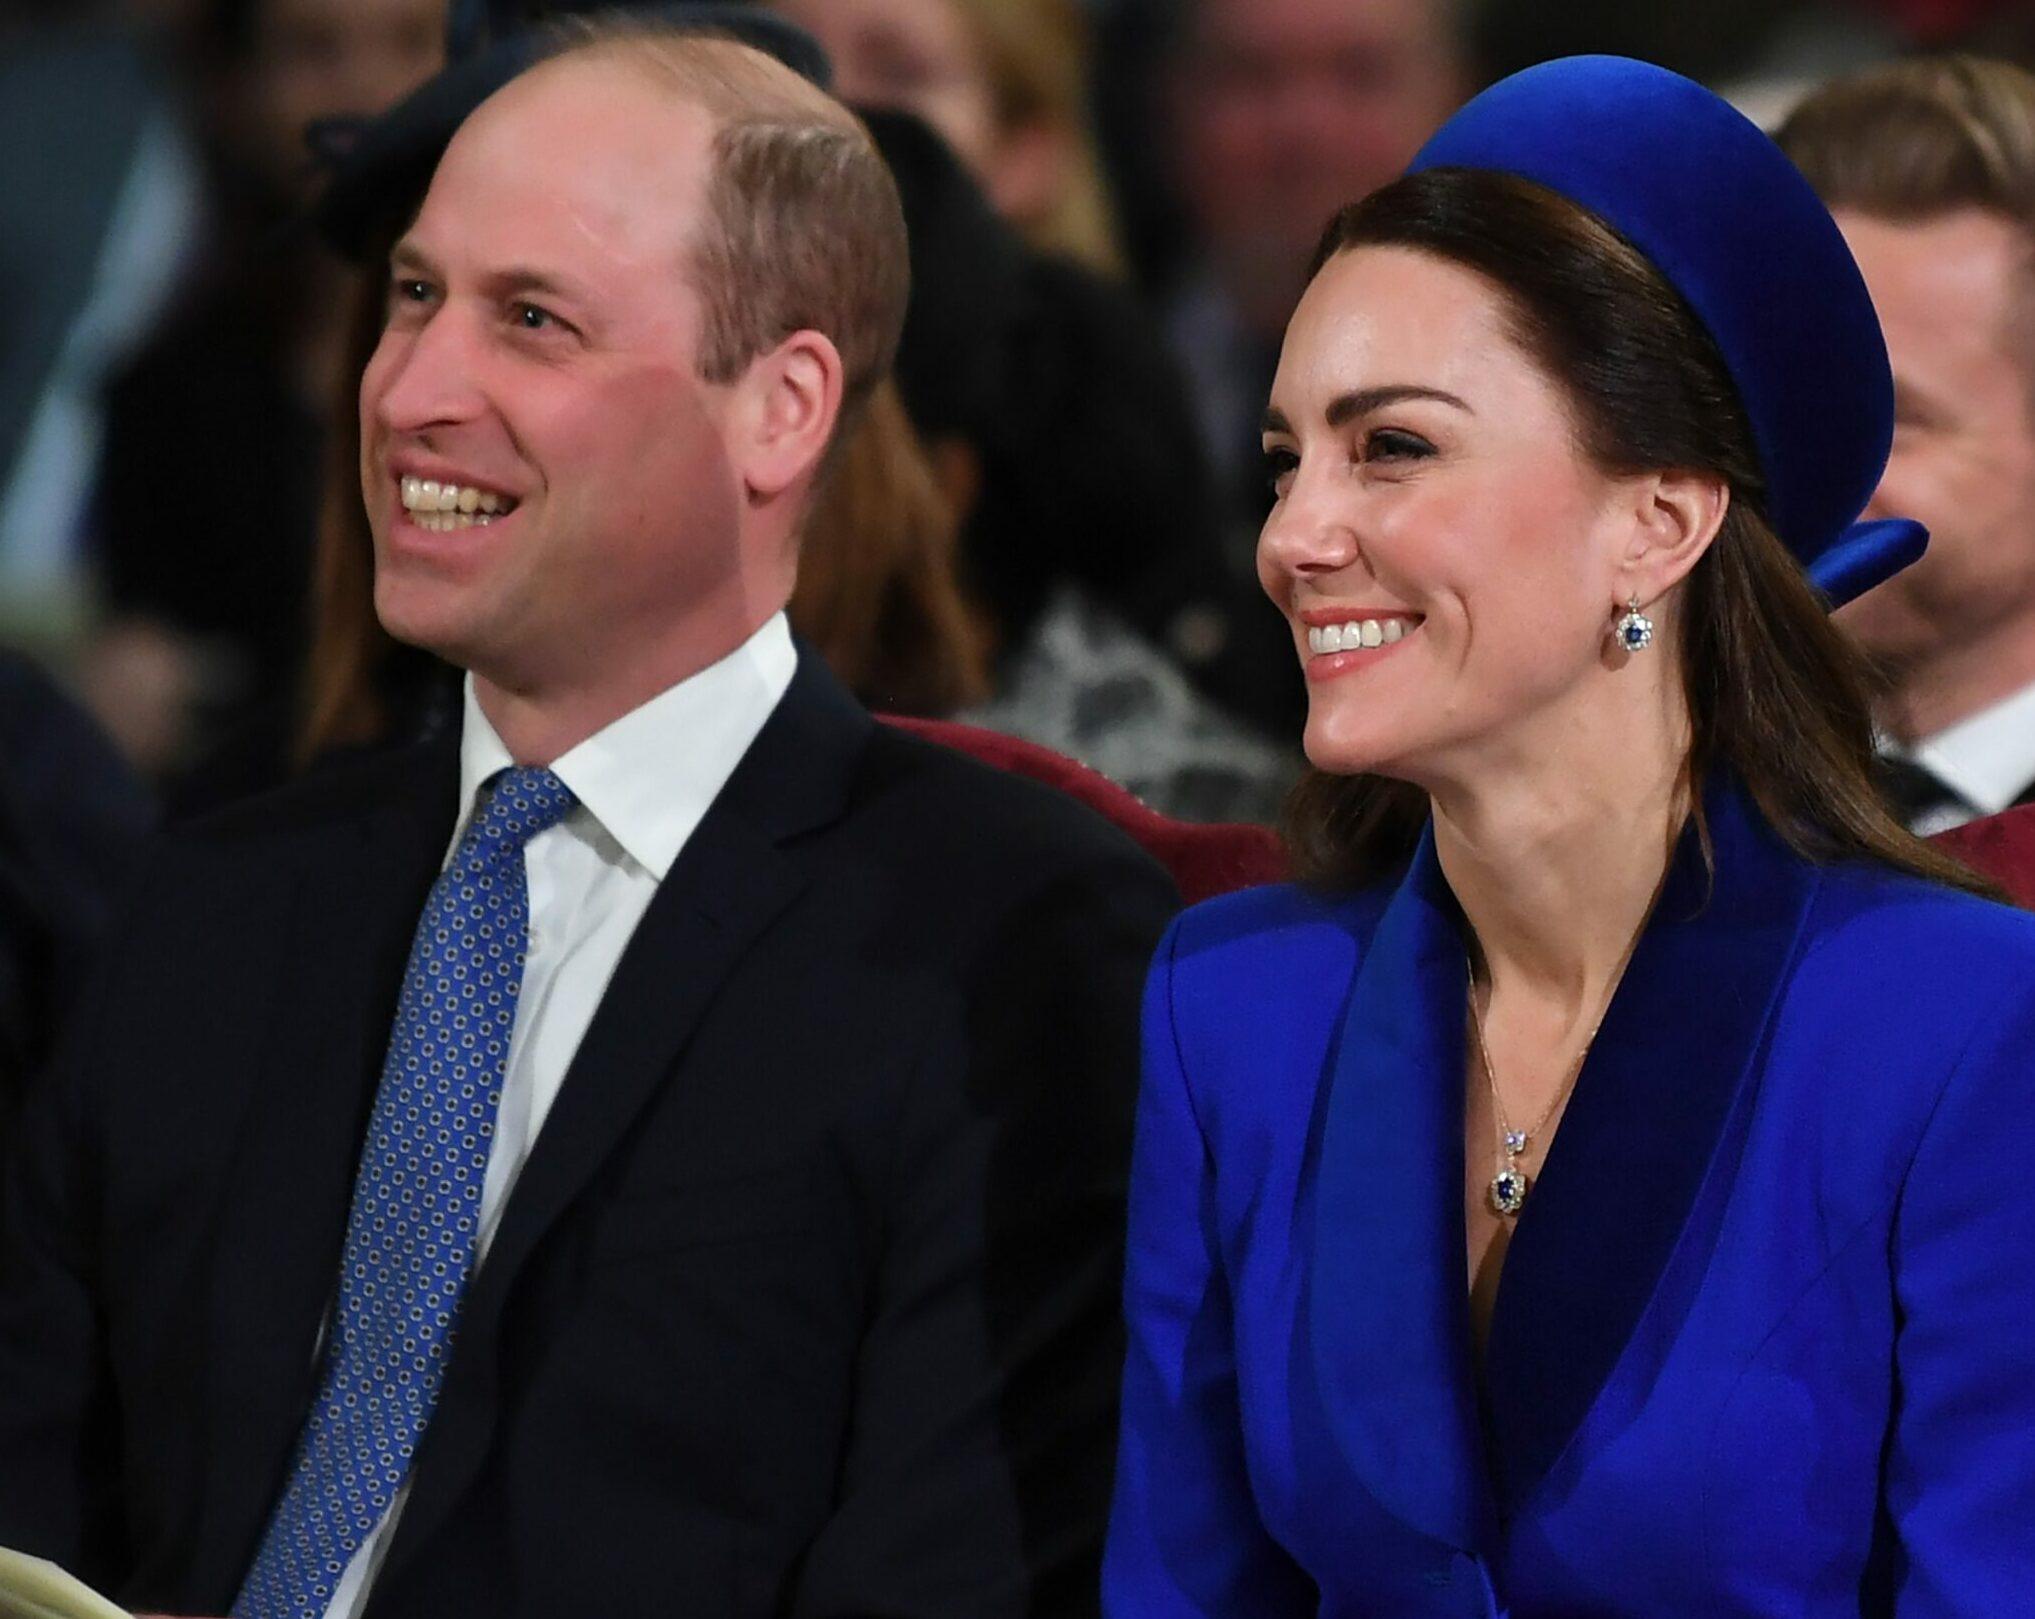 Members of the Royal Family attend the Commonwealth Service at Westminster Abbey, London, UK, on the 14th March, 2022.